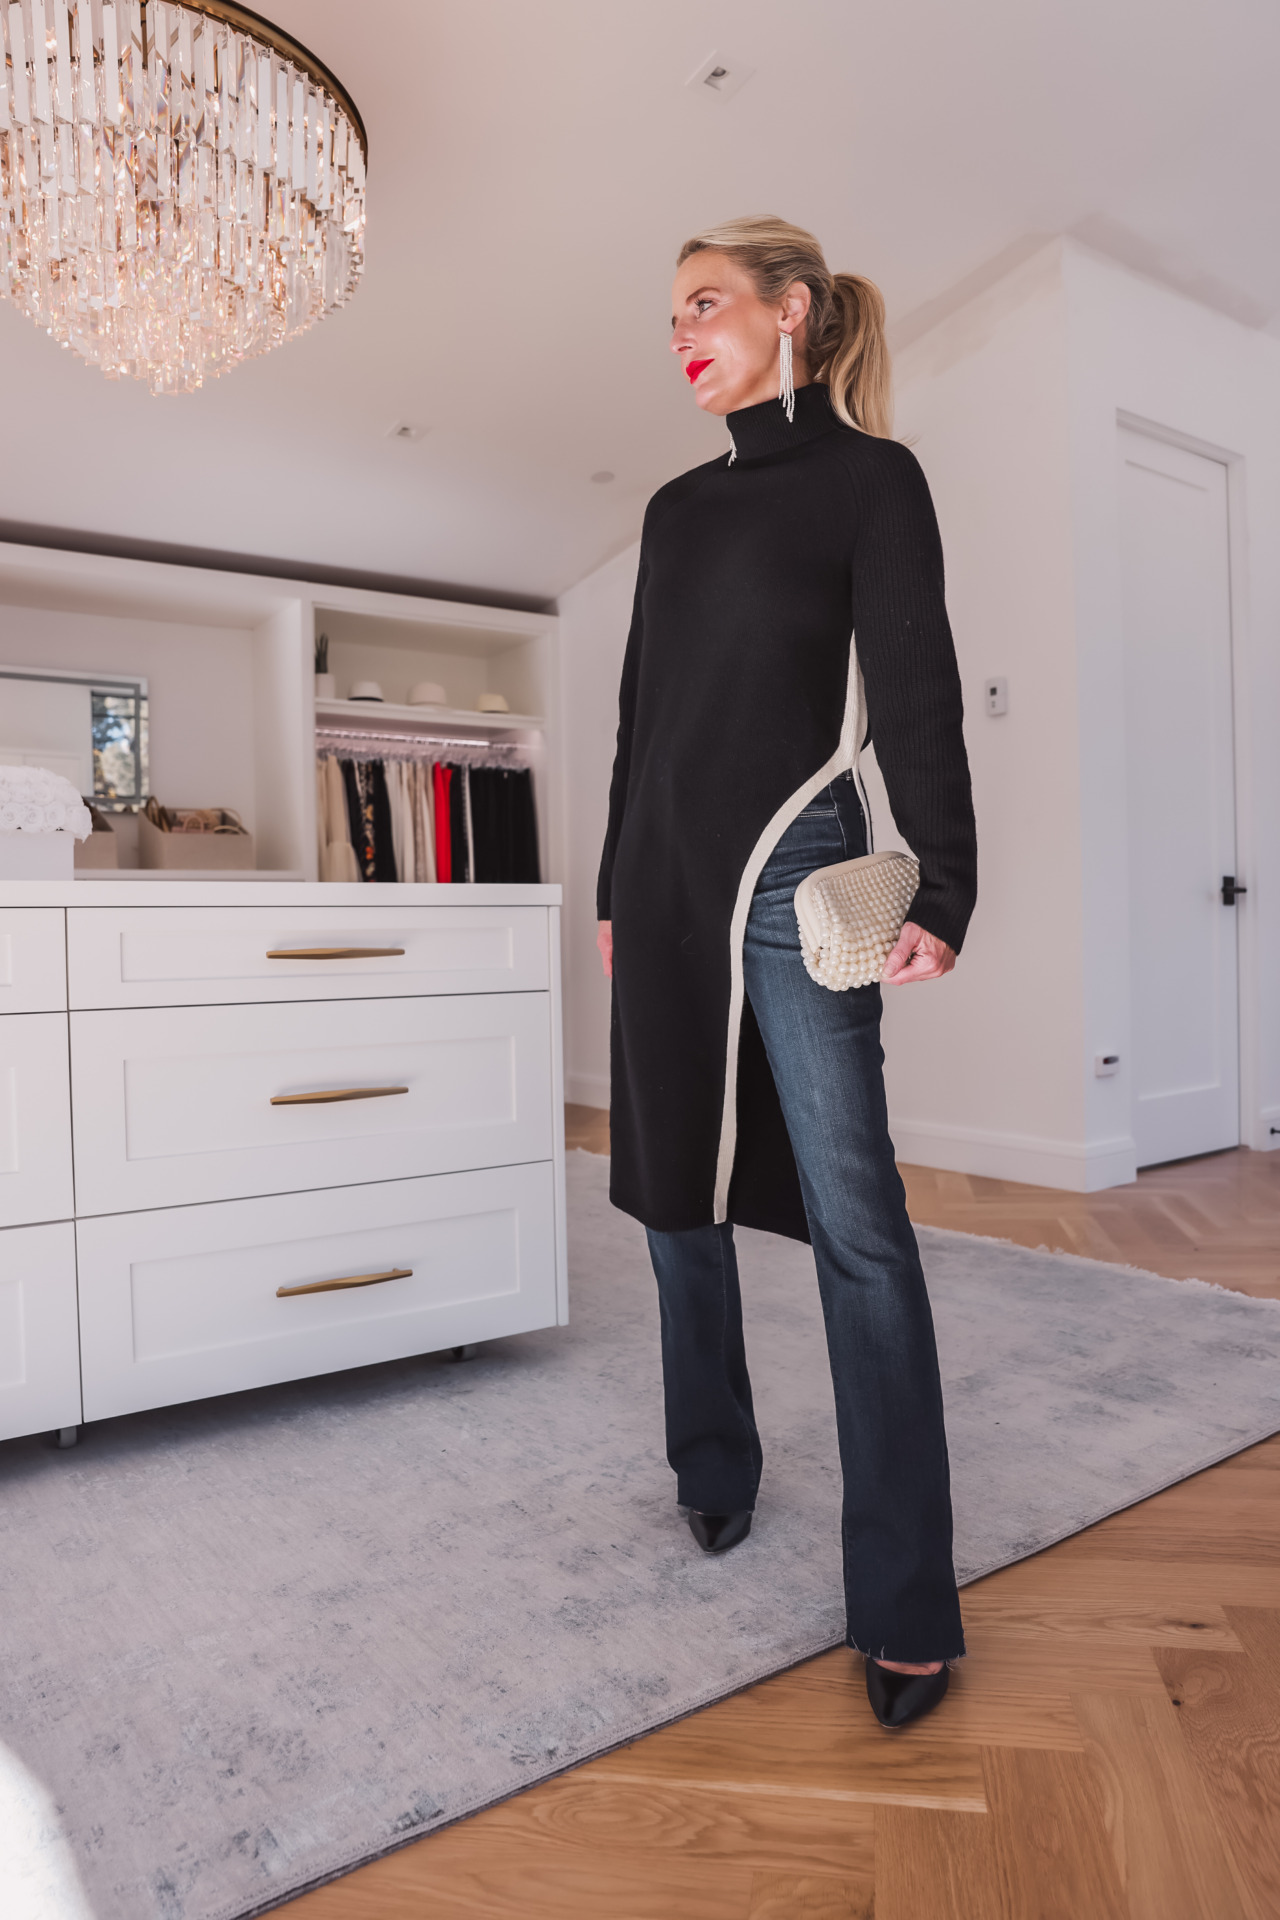 Jeans + Asymmetrical Sweater | How To Dress Up Jeans For A Holiday Party